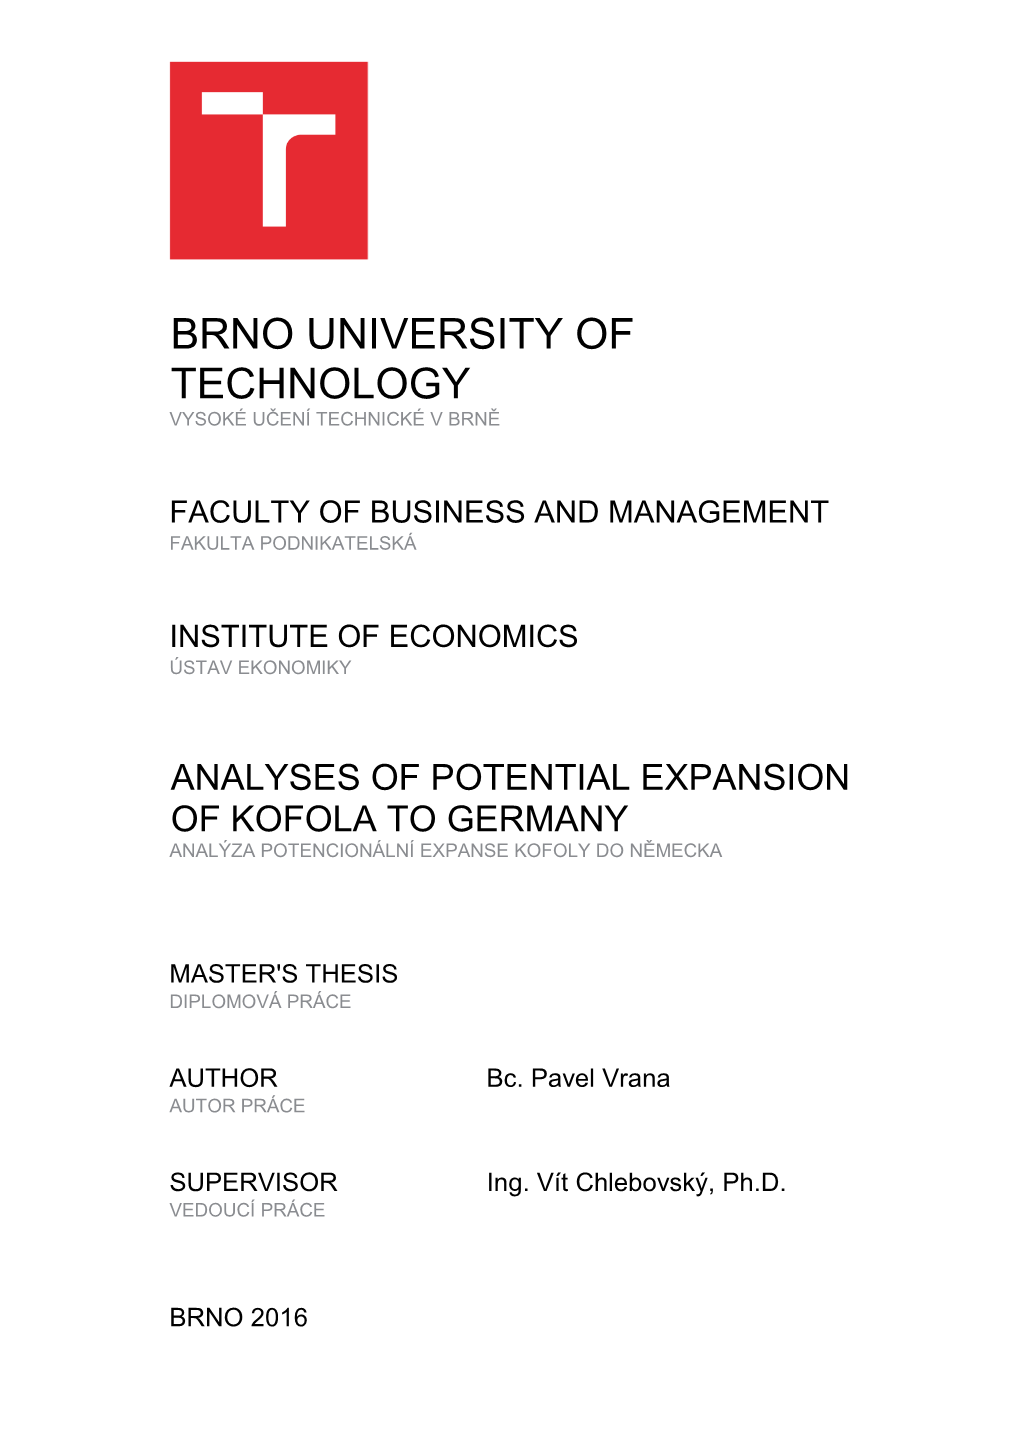 Brno University of Technology, Faculty of Business and Management, 2016